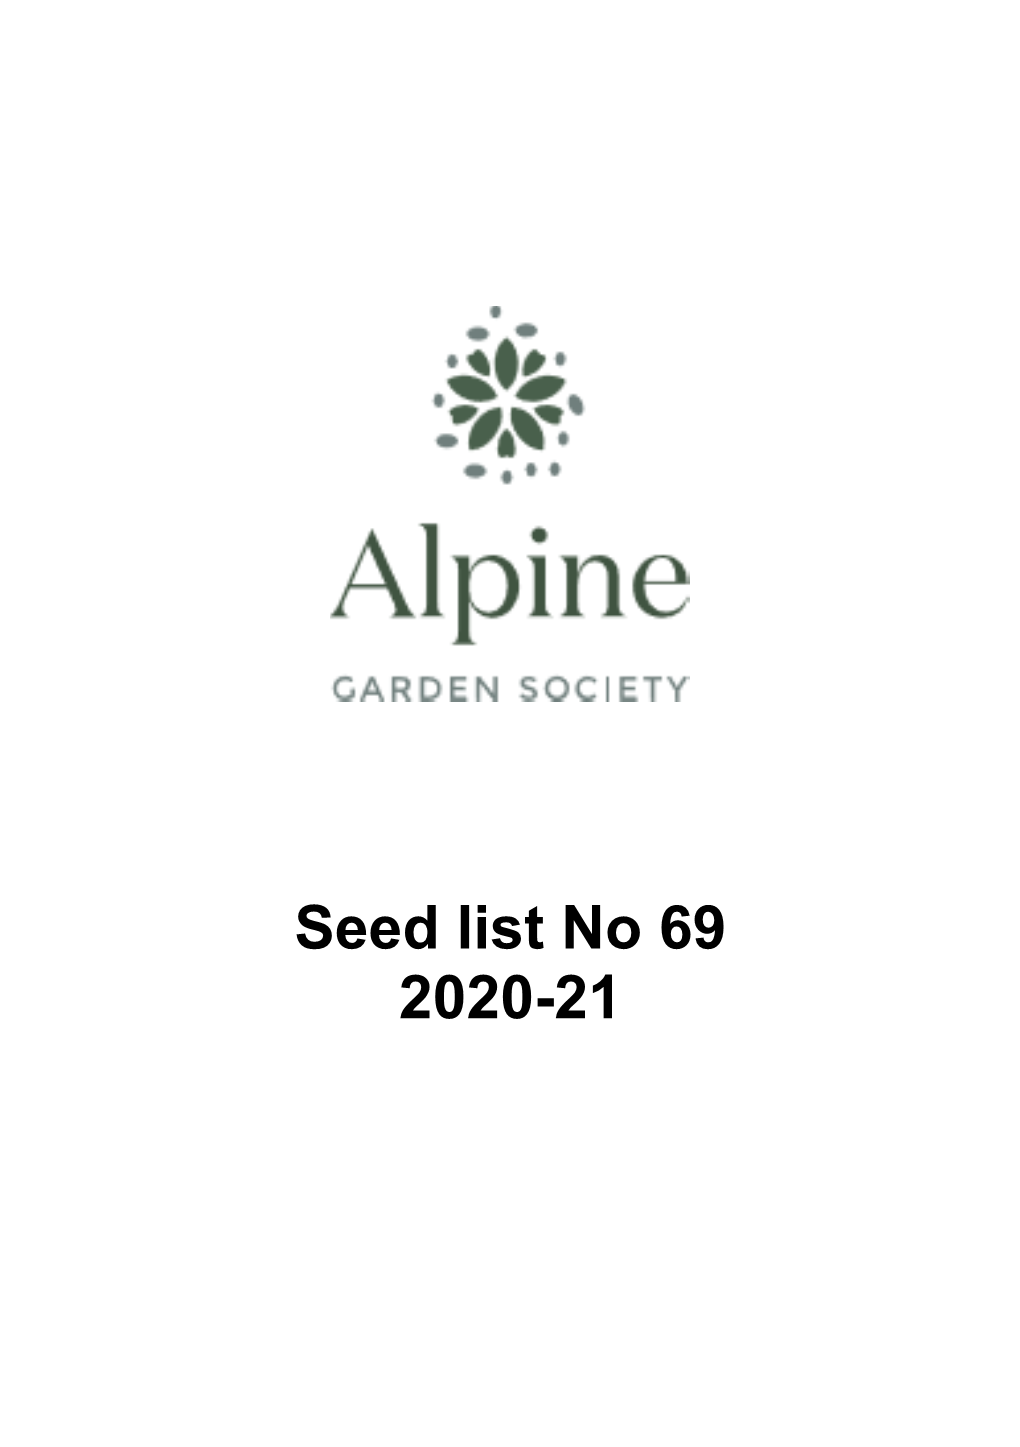 AGS Seed List No 69 2020